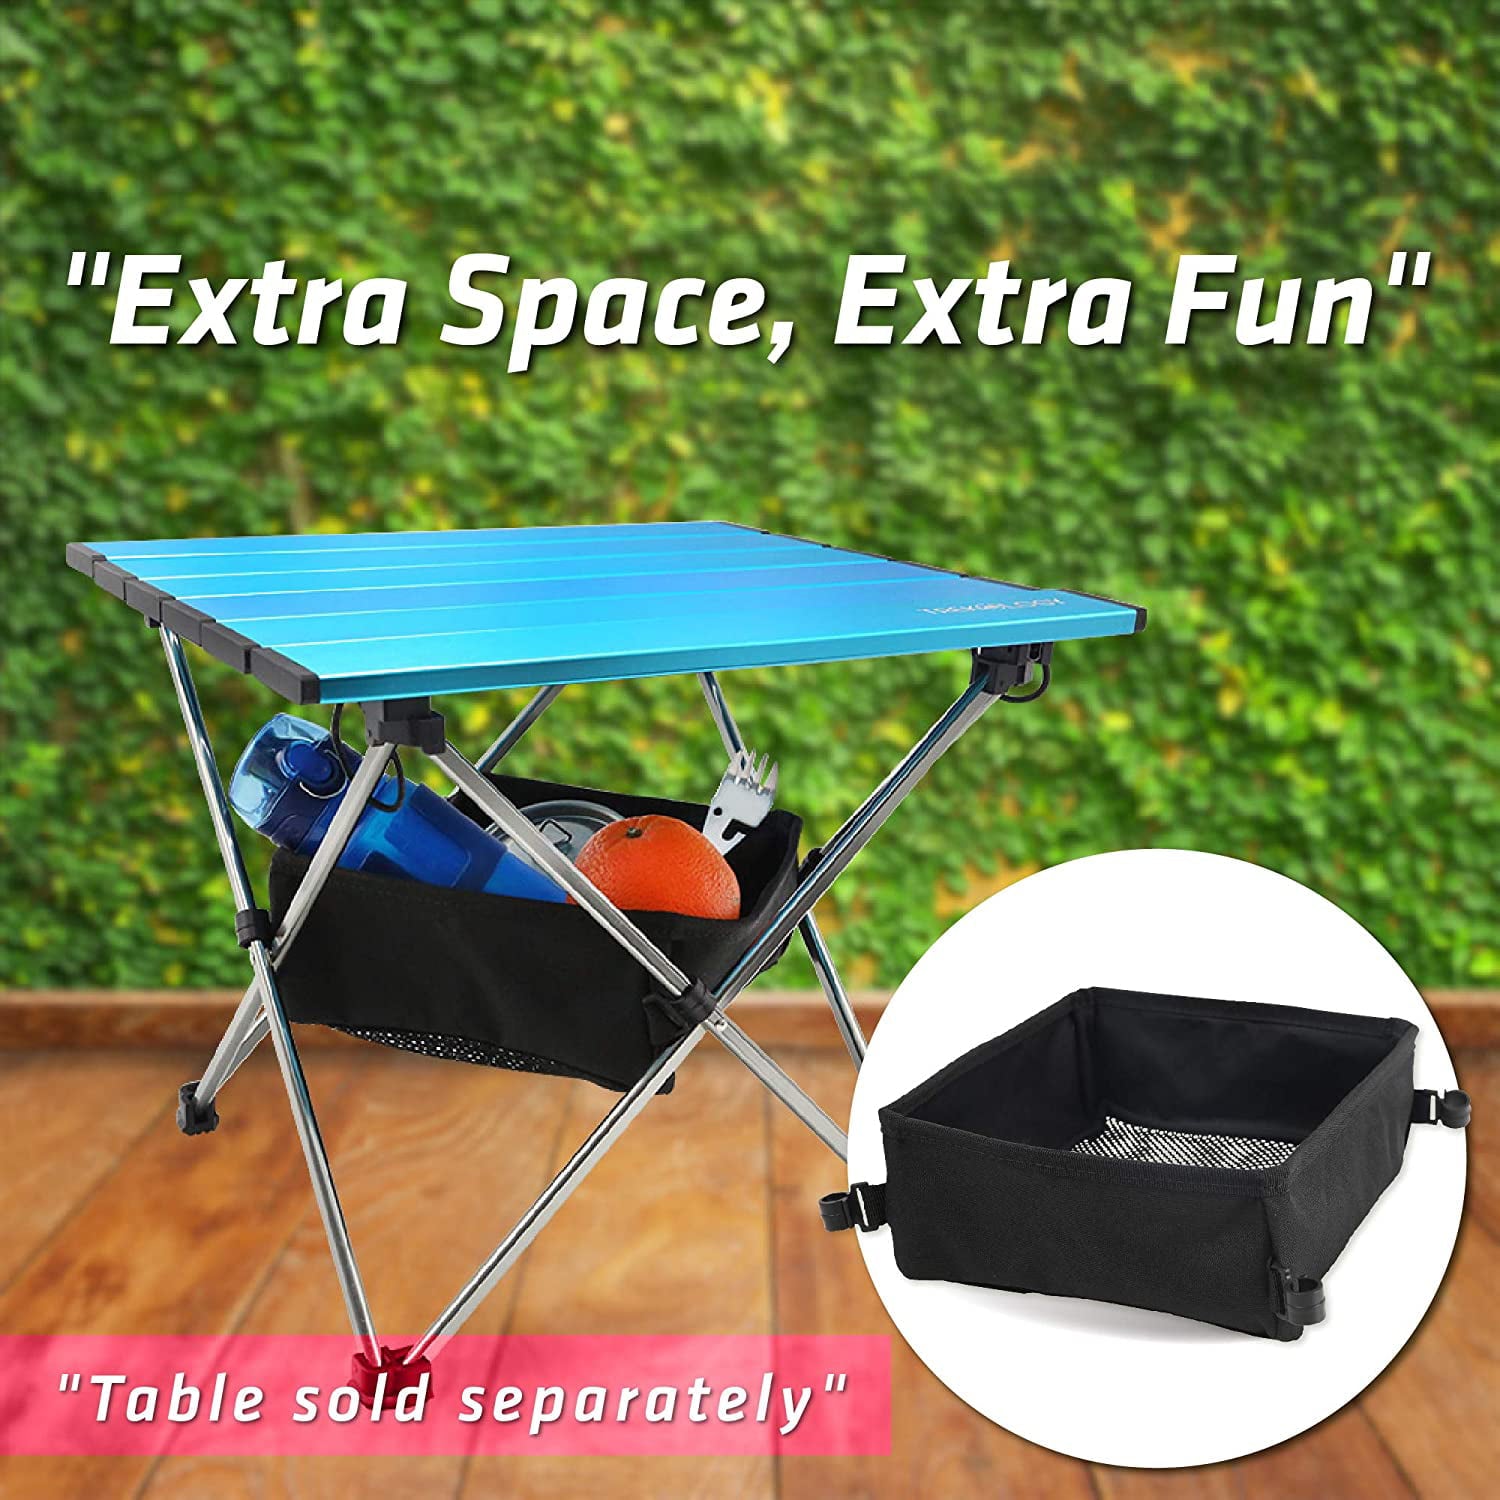 Beinou Portable Foldable Small Camping Table， Small Sizes Mesh Net Organizer to Put and Hold Small Items for Pop up Table， Beach Table， Picnic Table